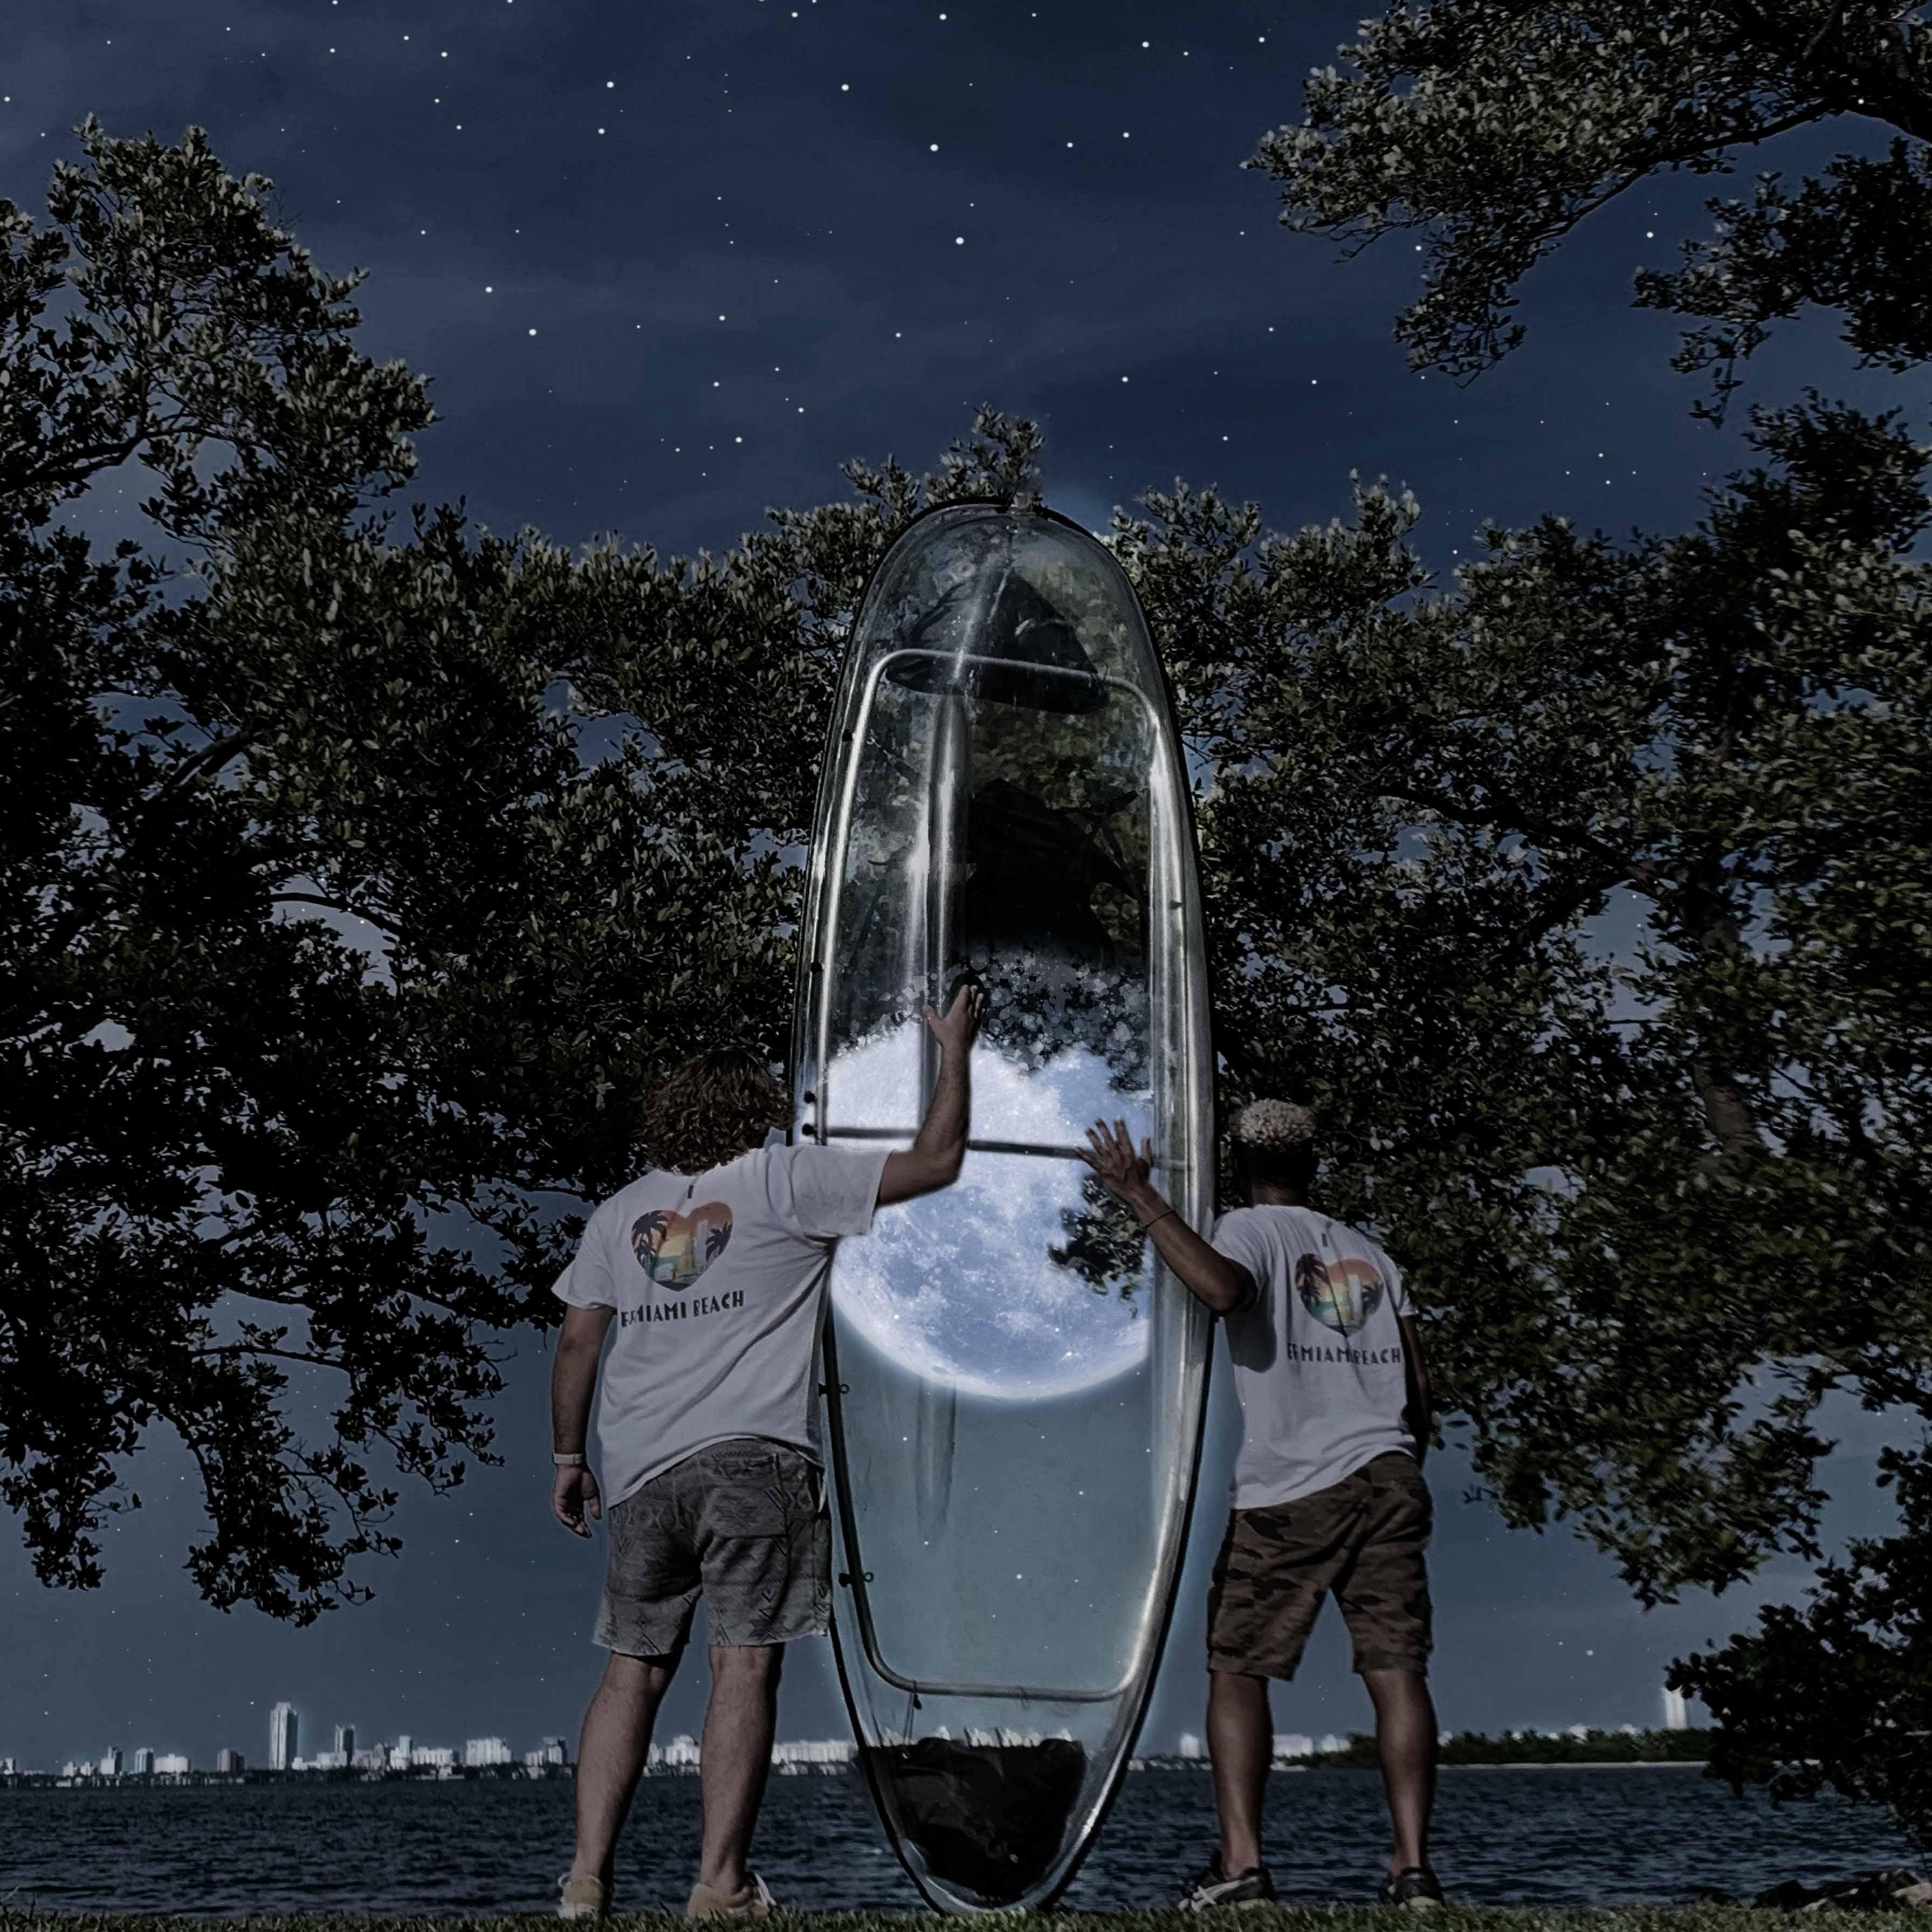 FULL Moonlight Event at CLEAR VIEW KAYAKS Miami Beach - Champagne 